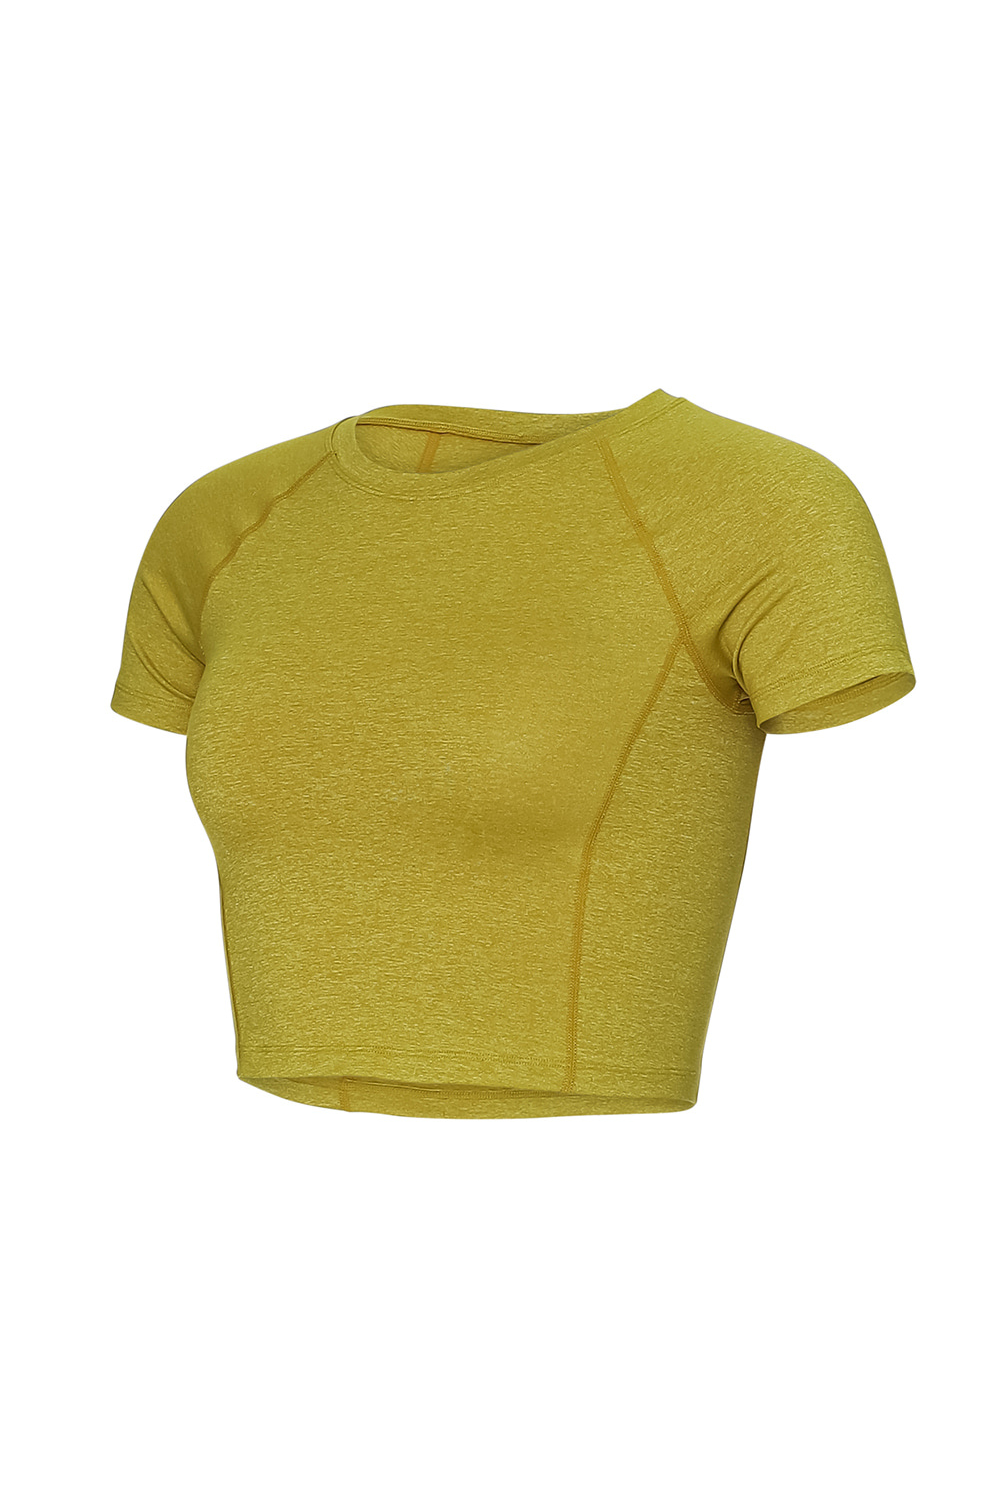 Airtouch Pace Melange Crop Short Sleeve